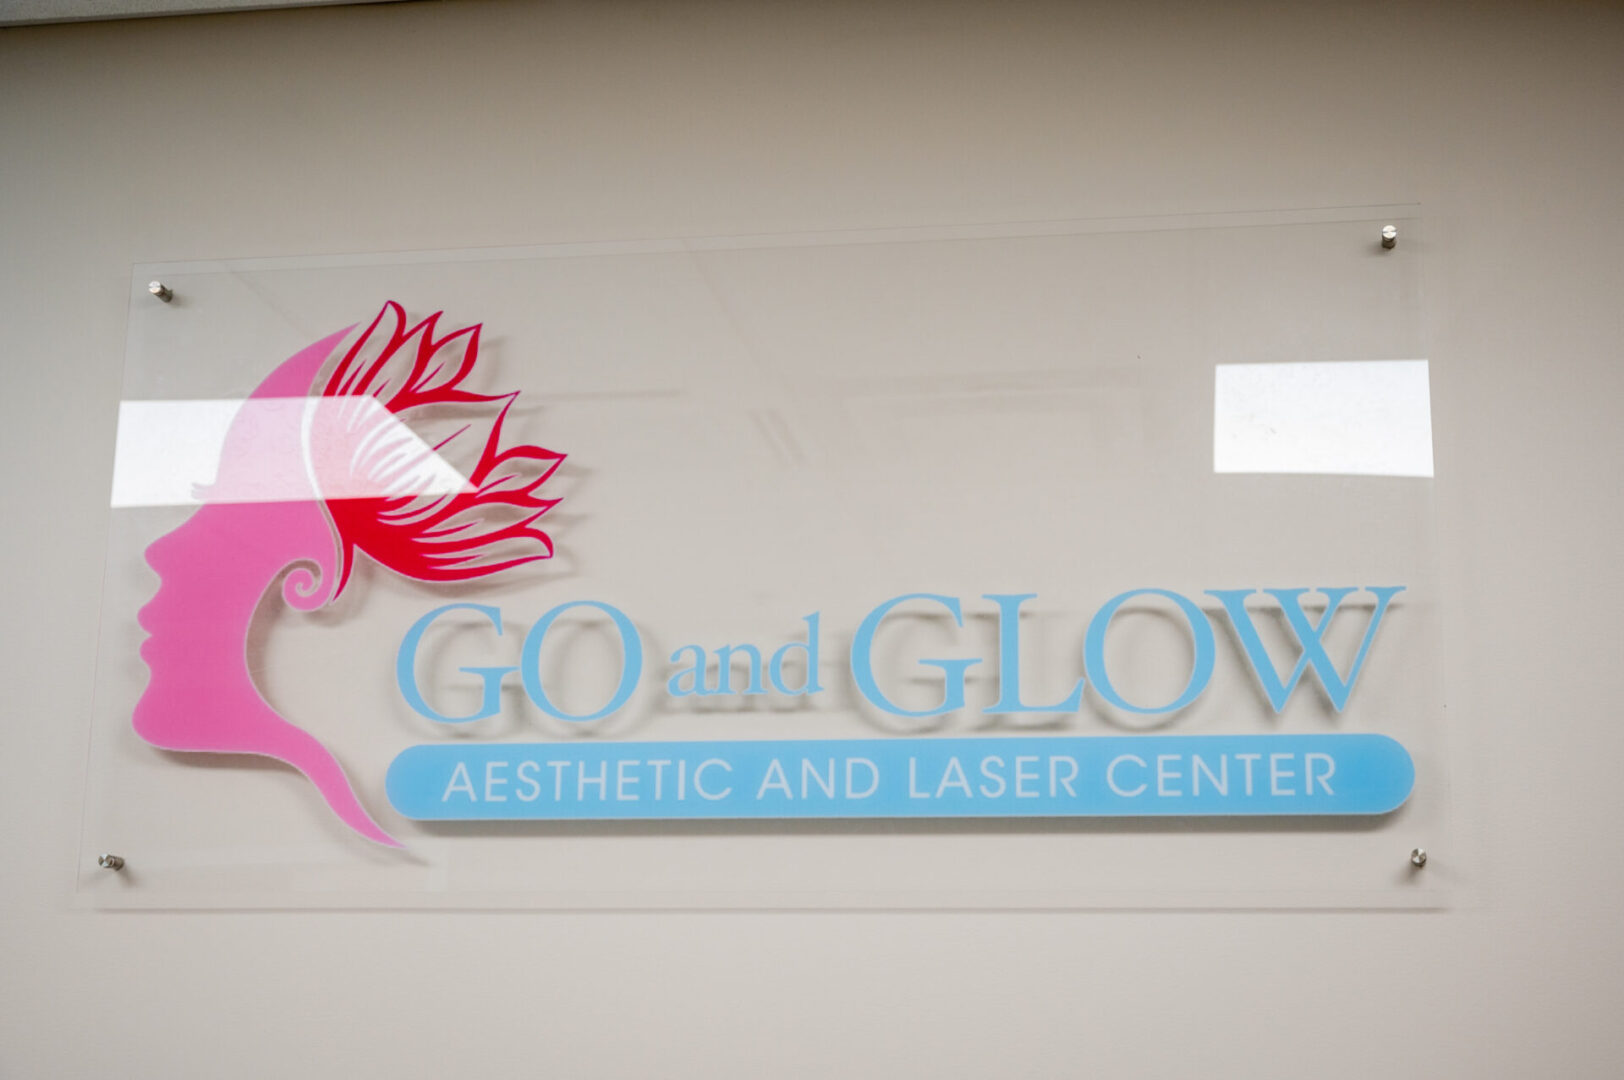 A sign that says go and glow aesthetic and laser center.